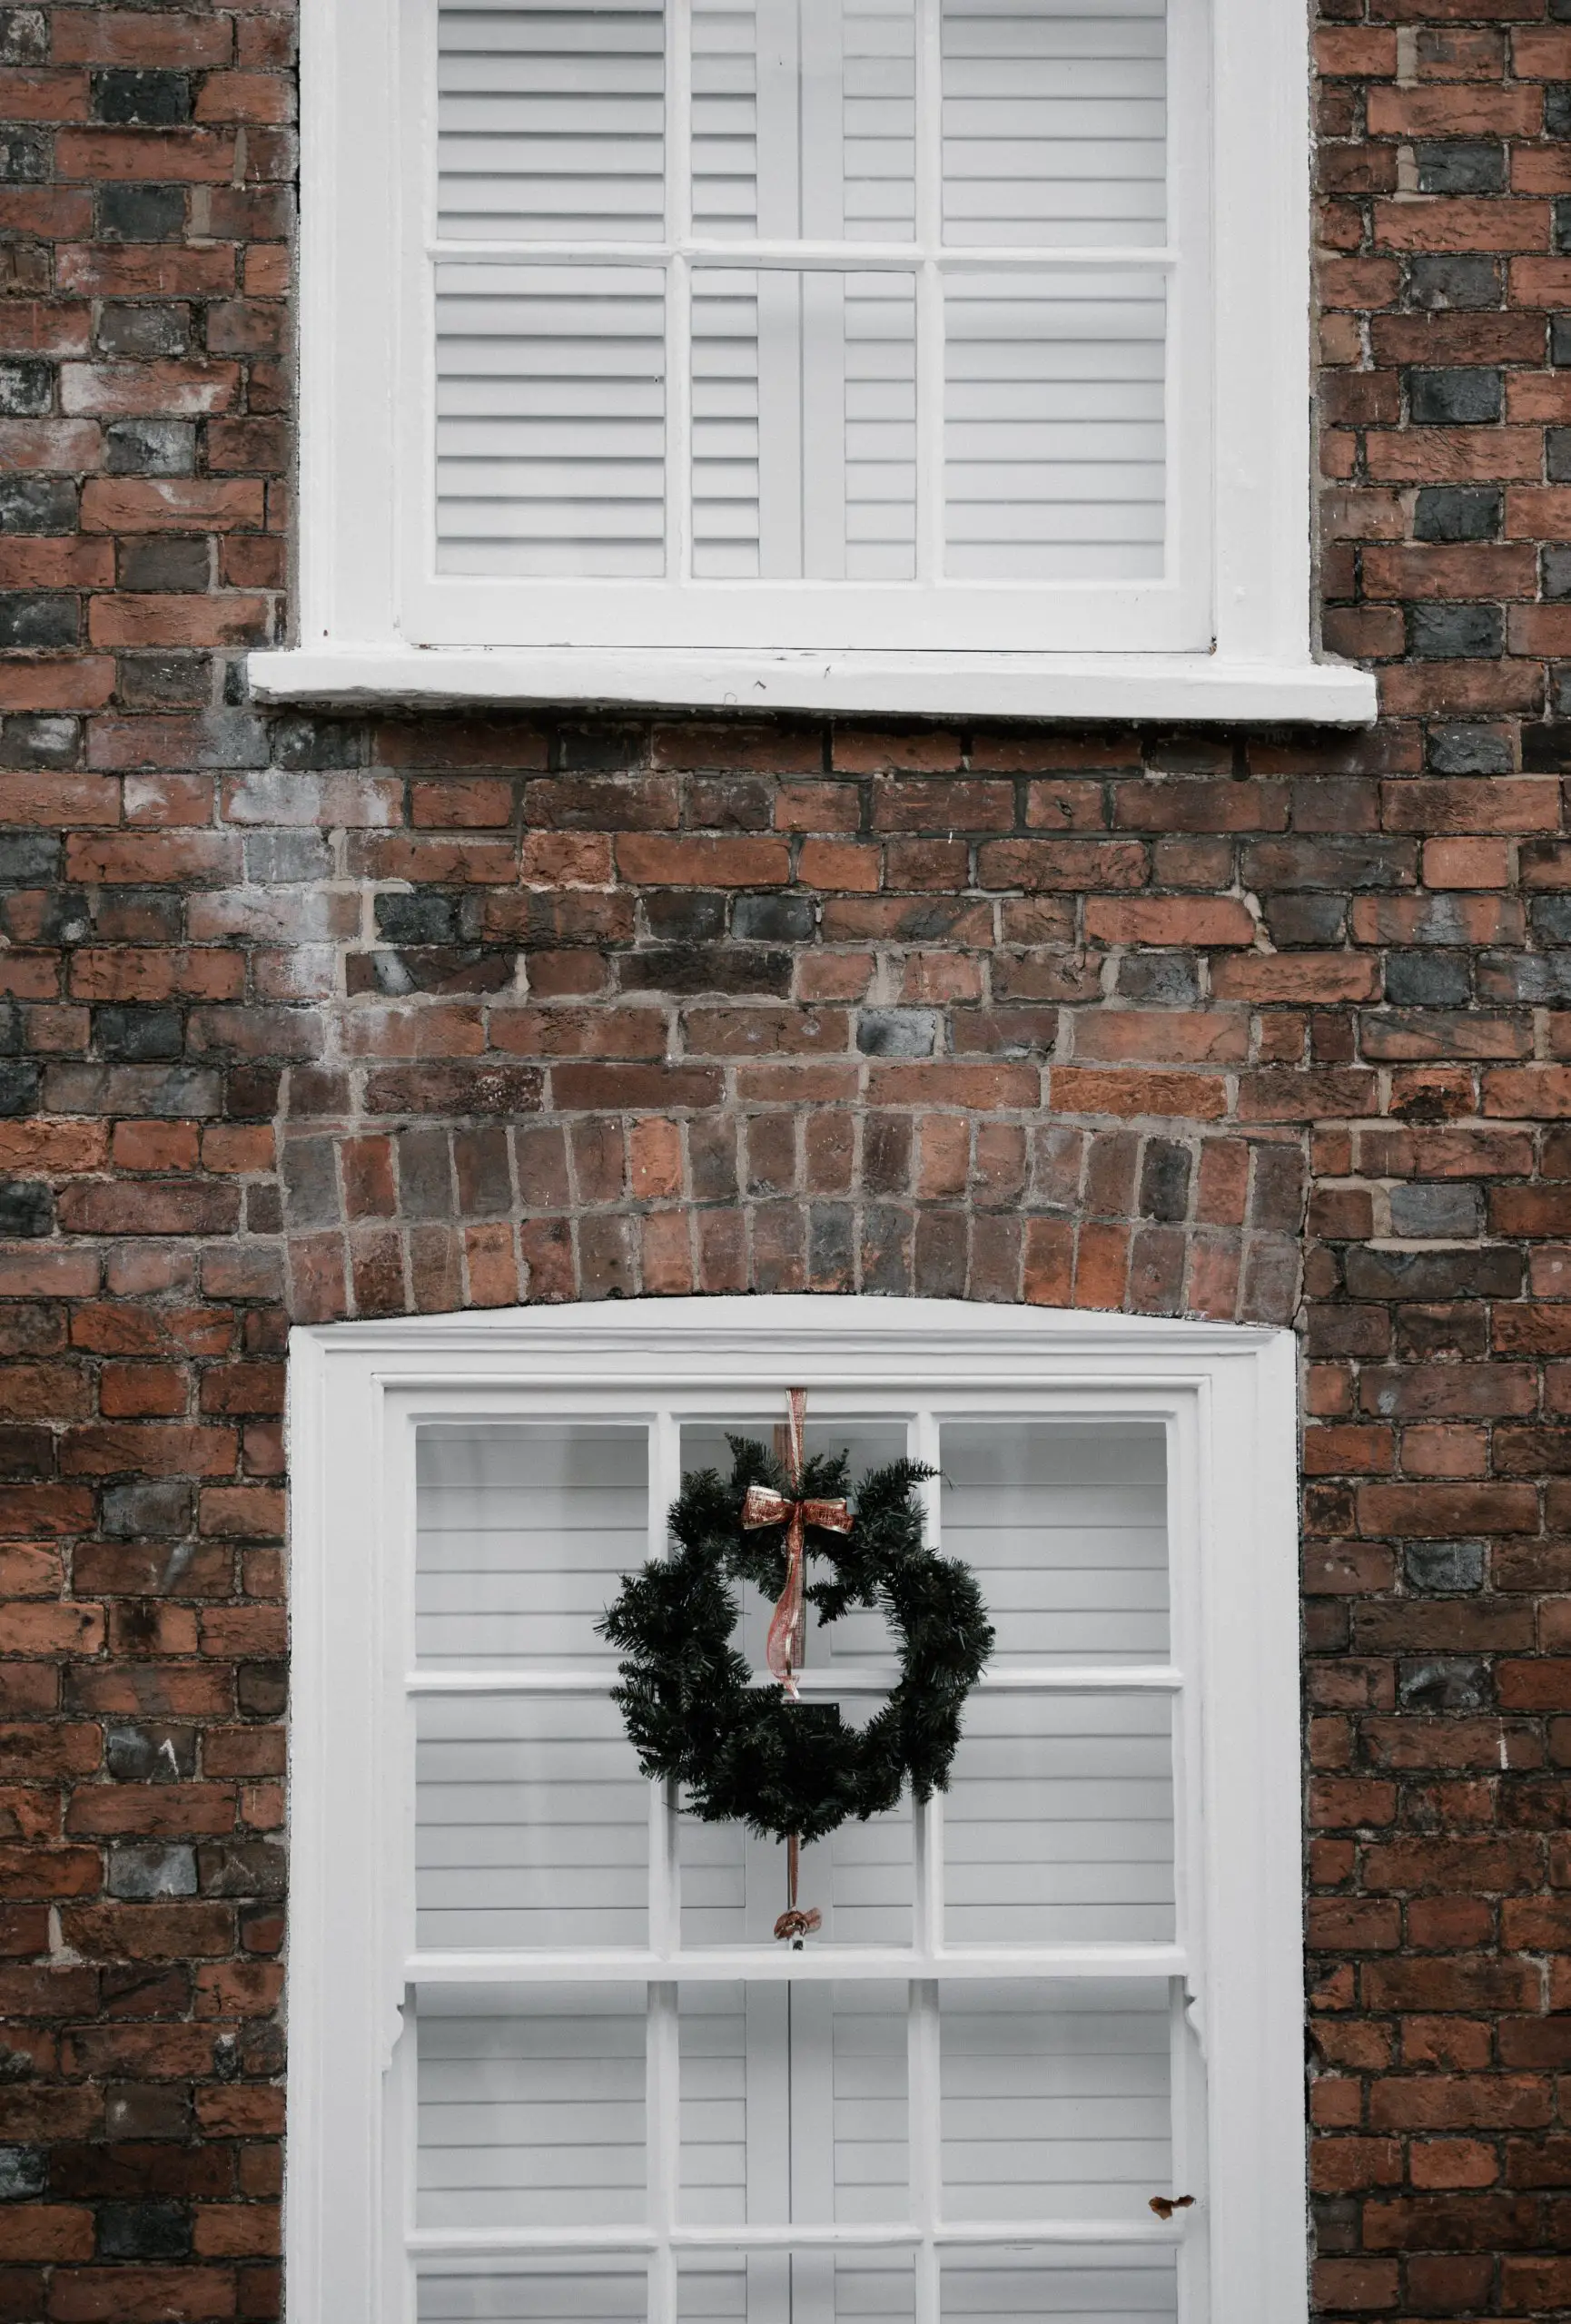 how to hang a wreath on an interior window